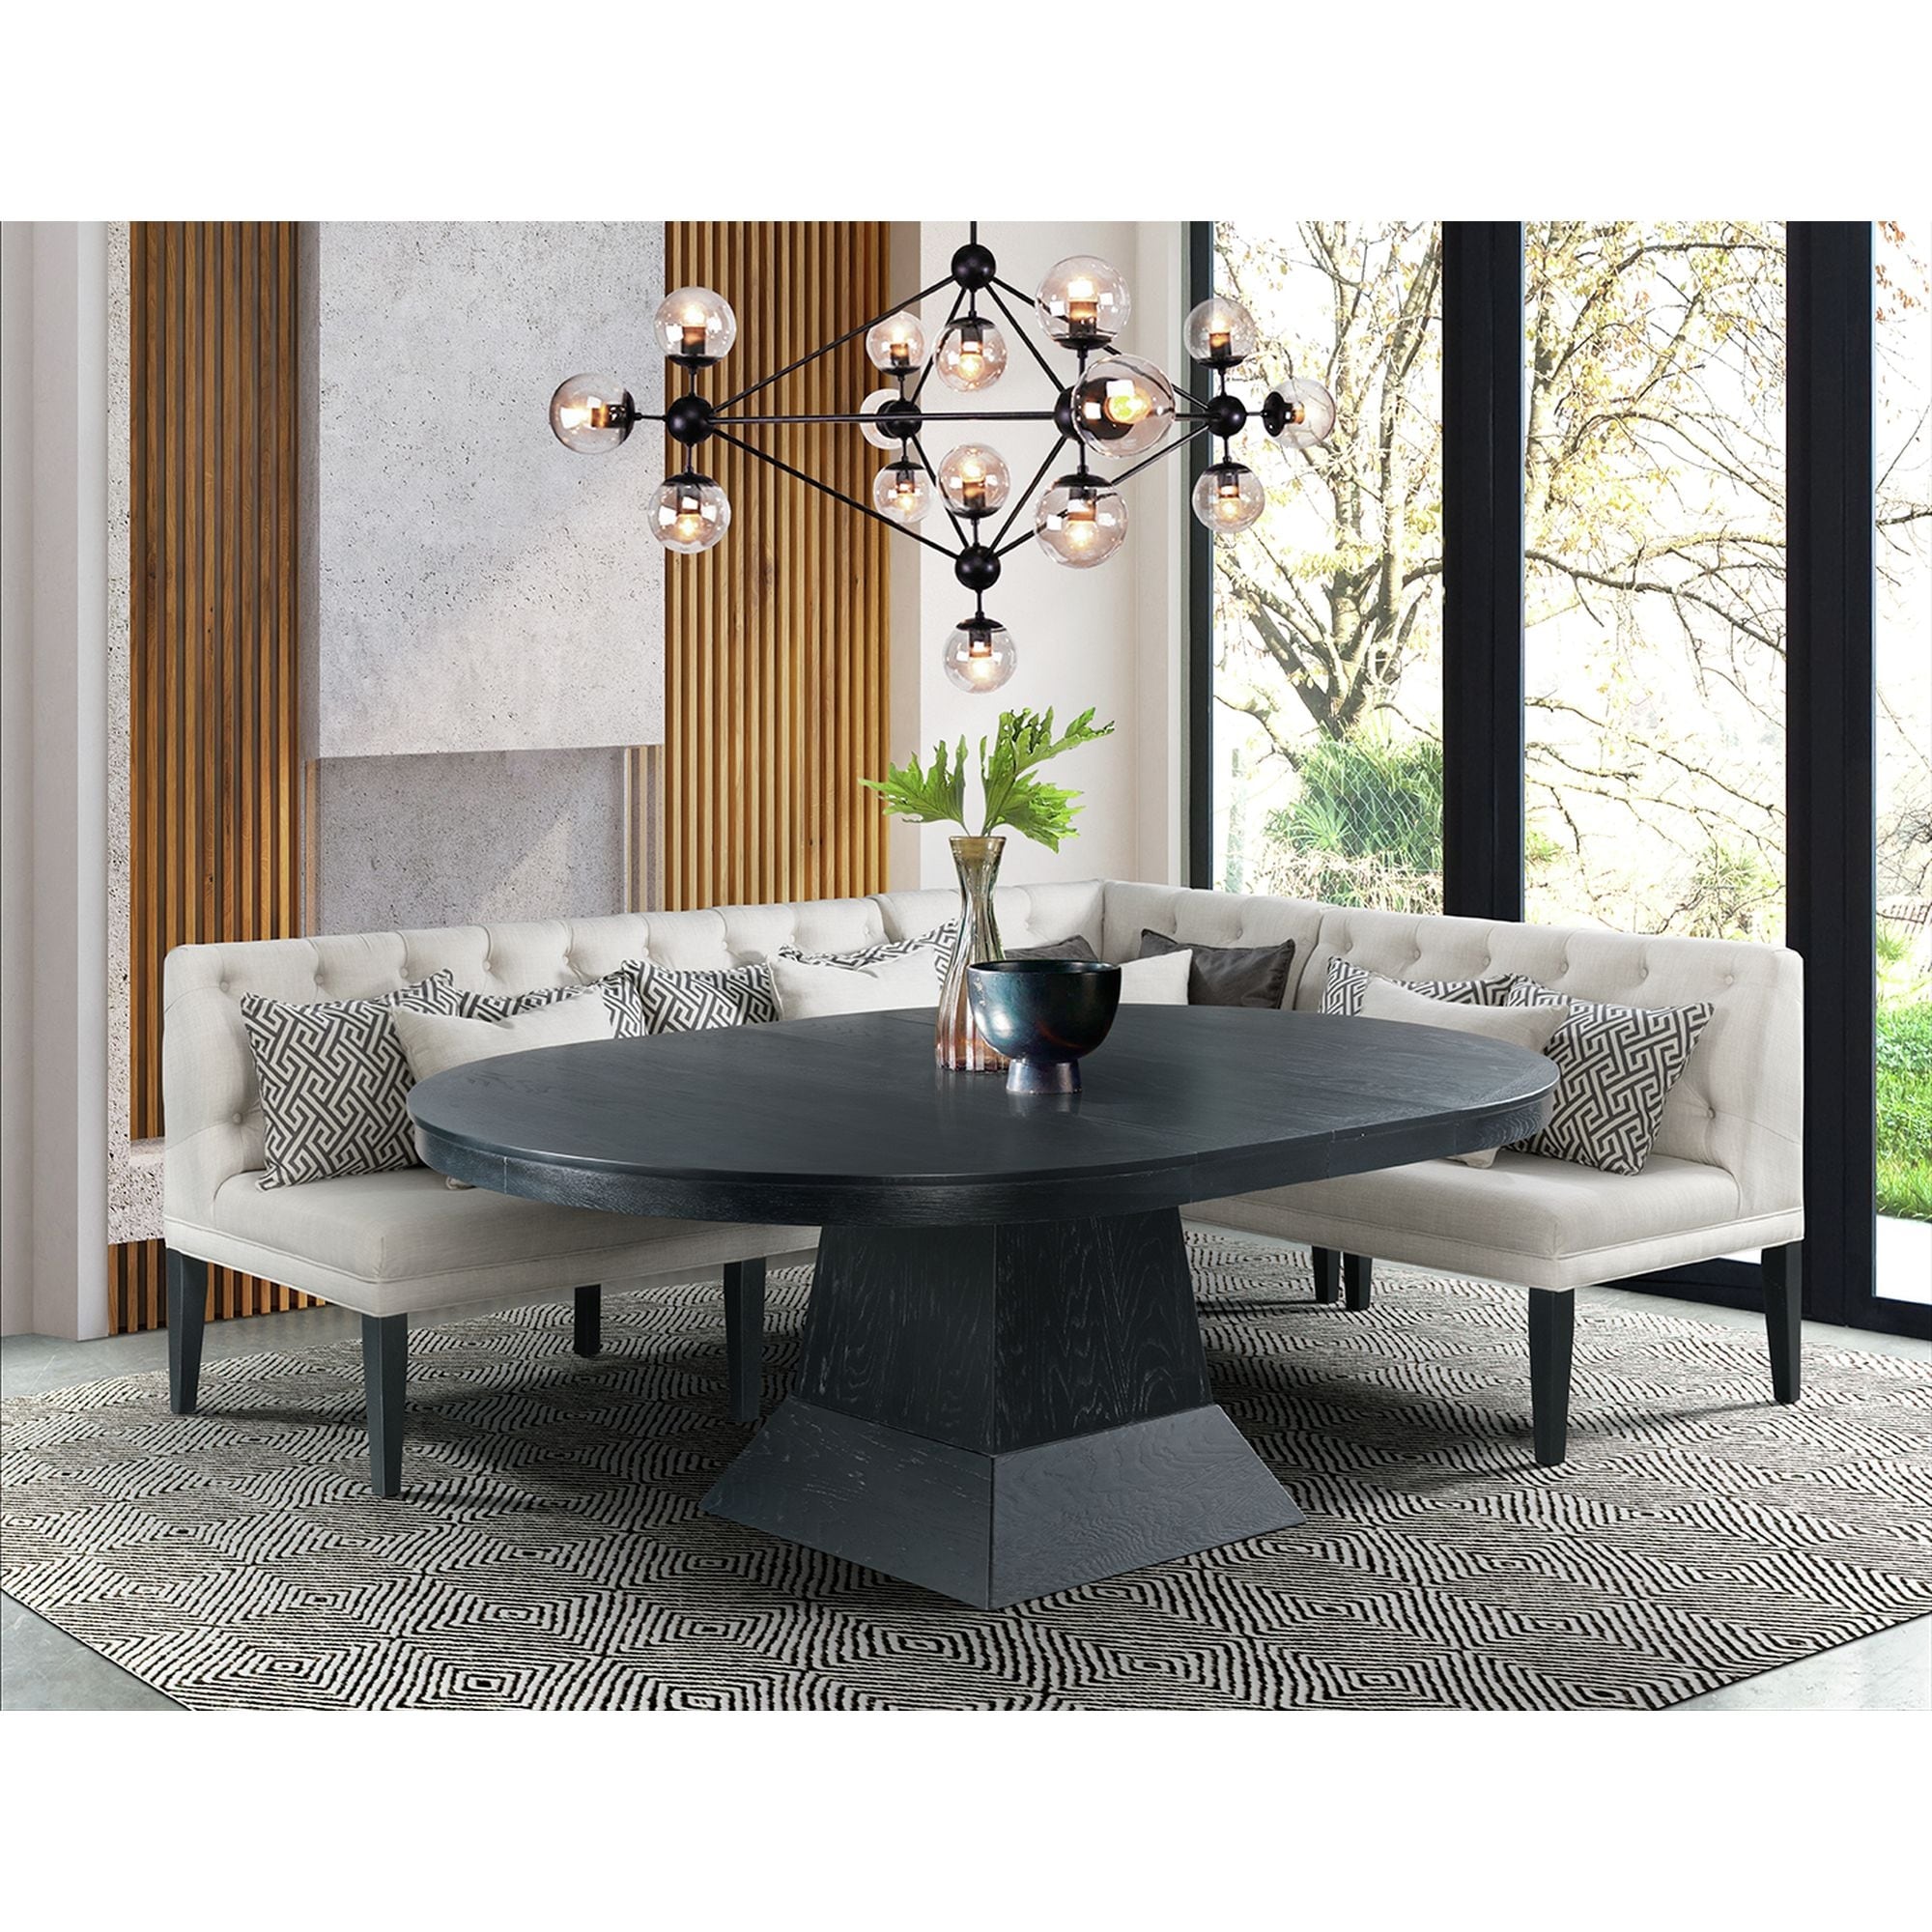 Picket House Furnishings Mara 4 Piece Oval Dining Table Set